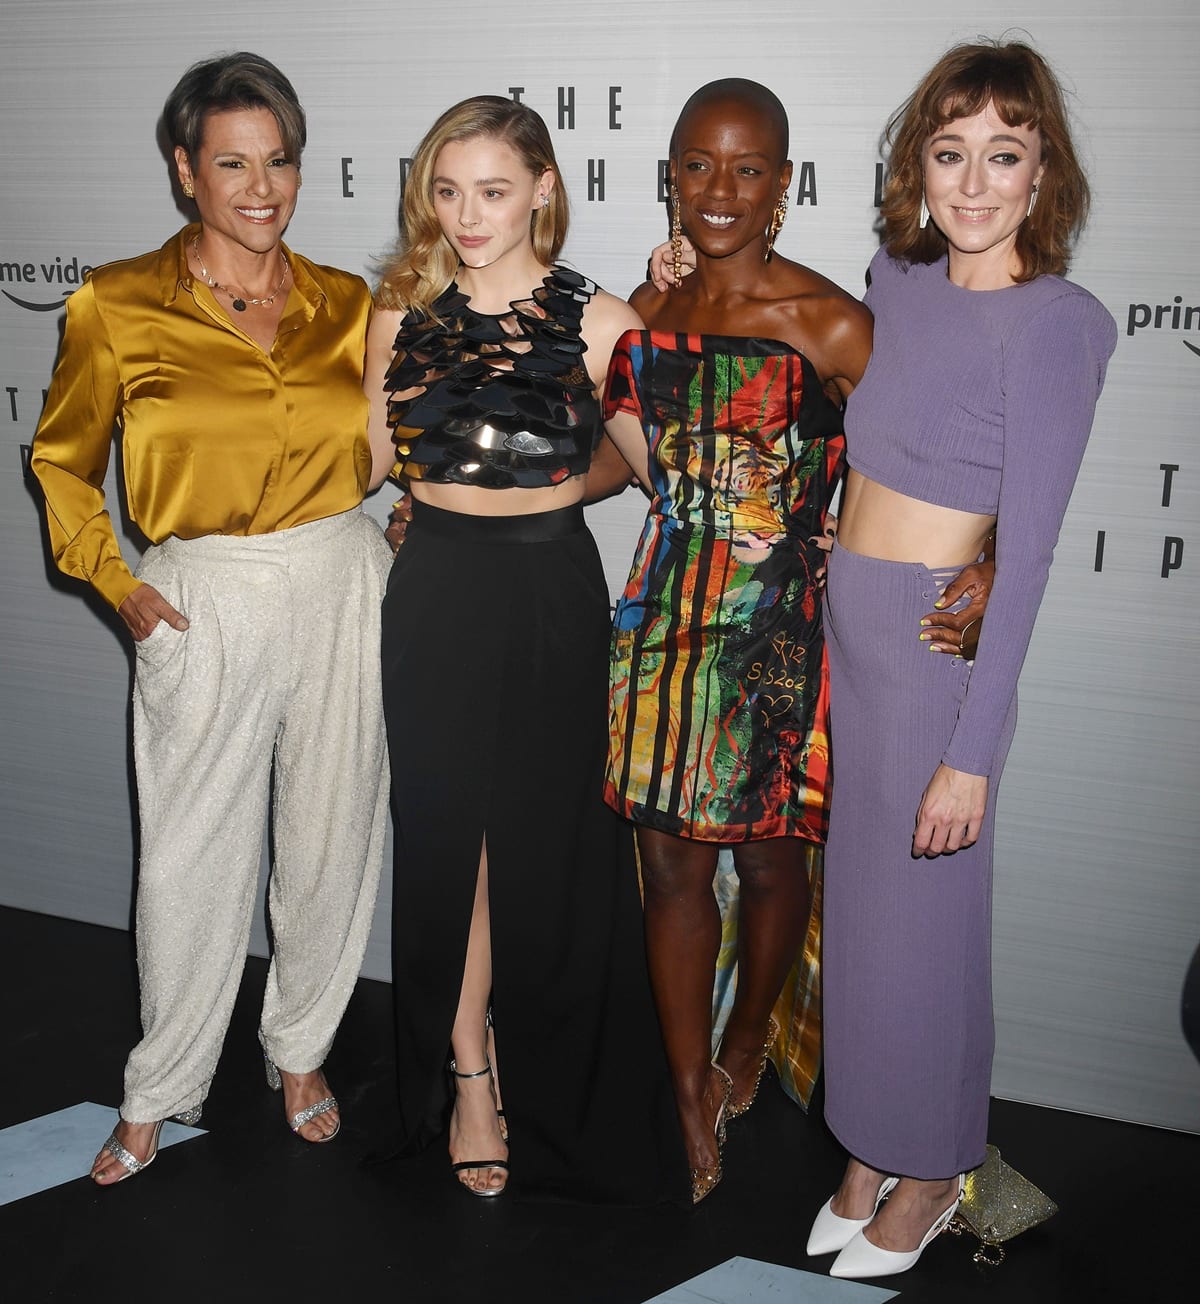 Chloë Grace Moretz looks much shorter than Alexandra Billings, T'Nia Miller, and Adelind Horan at Amazon Prime Video's "The Peripheral" Premiere